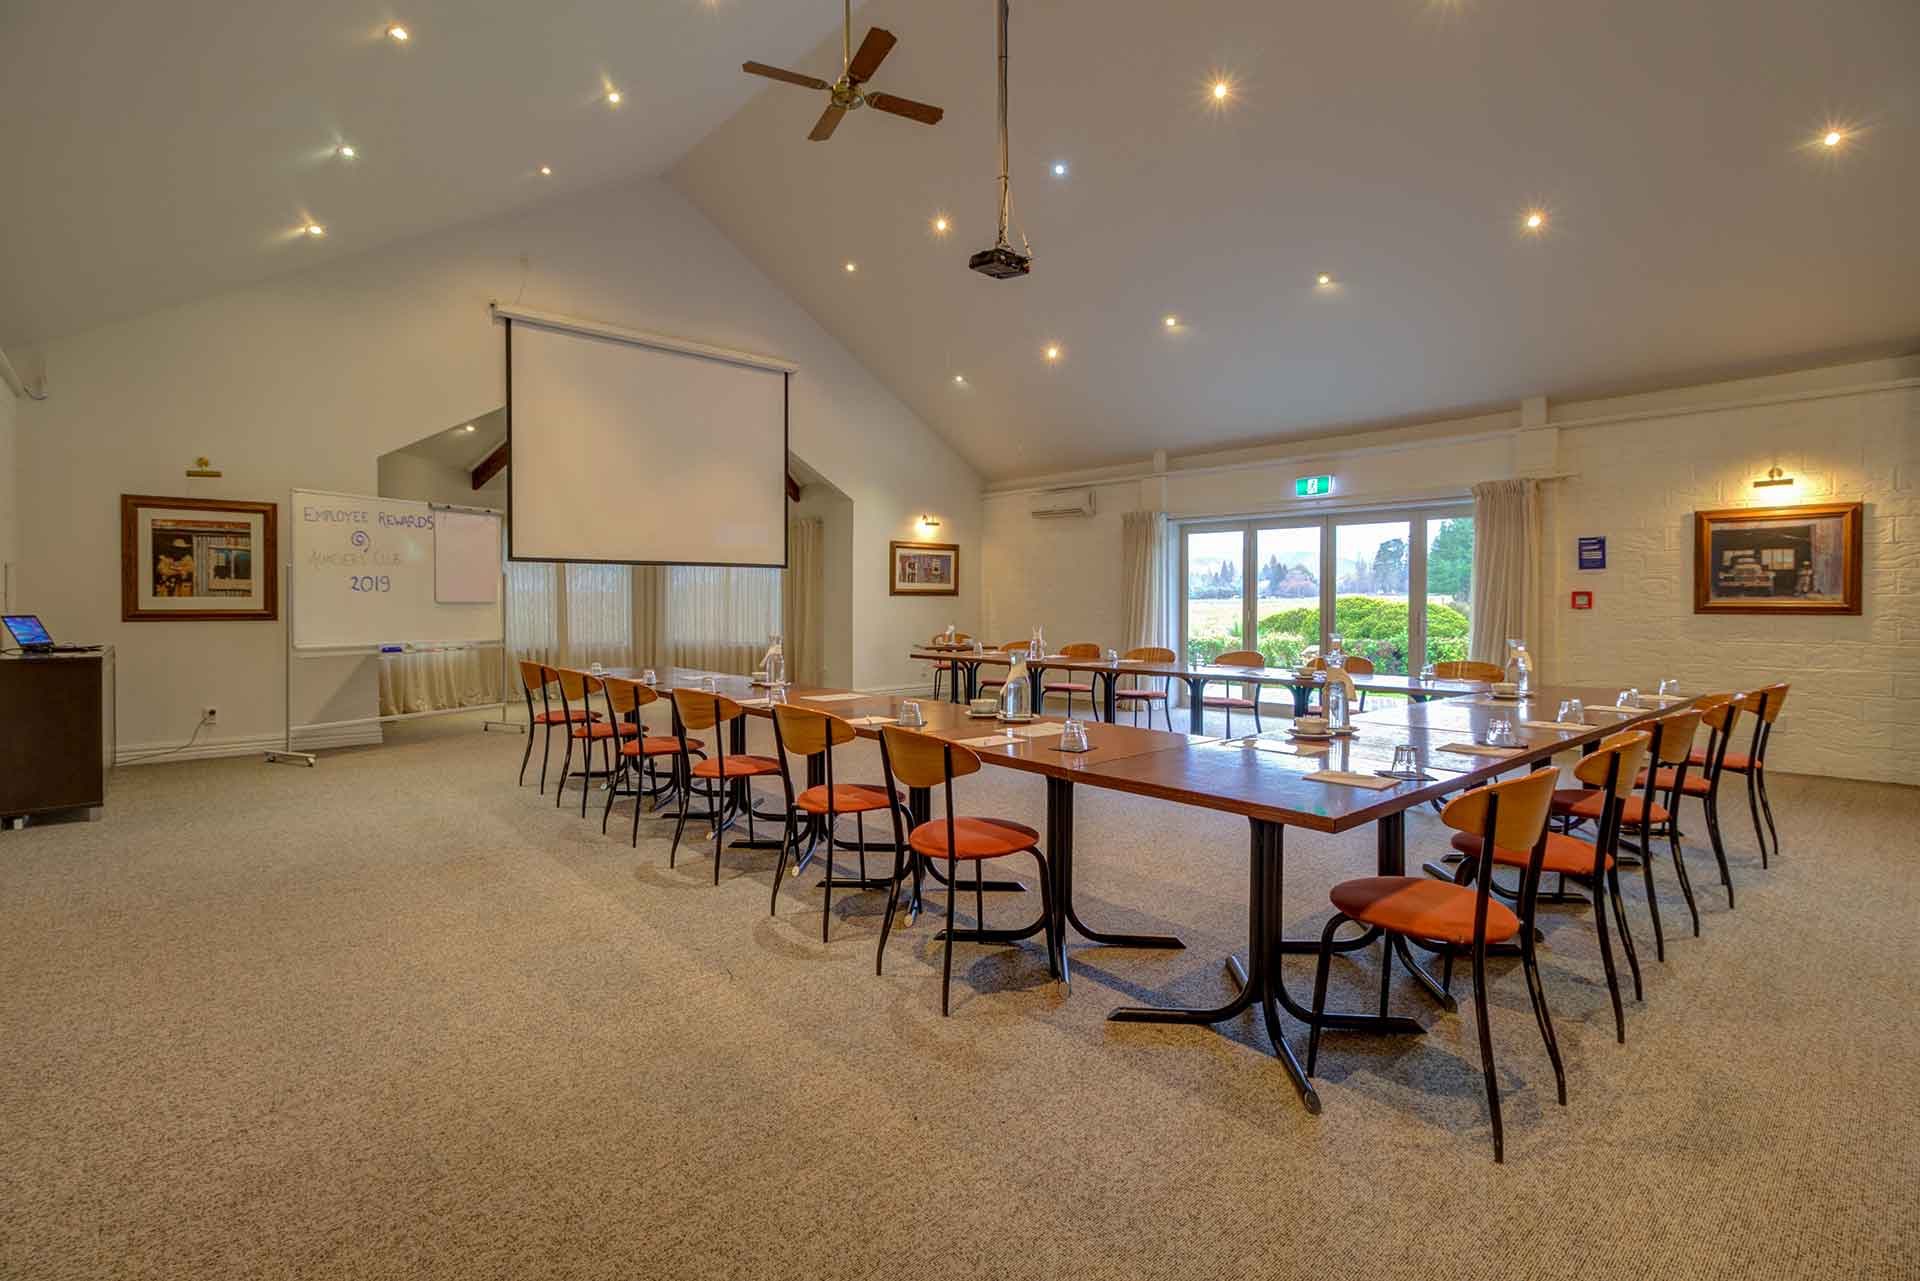 hanmer springs conference top venues enquiry